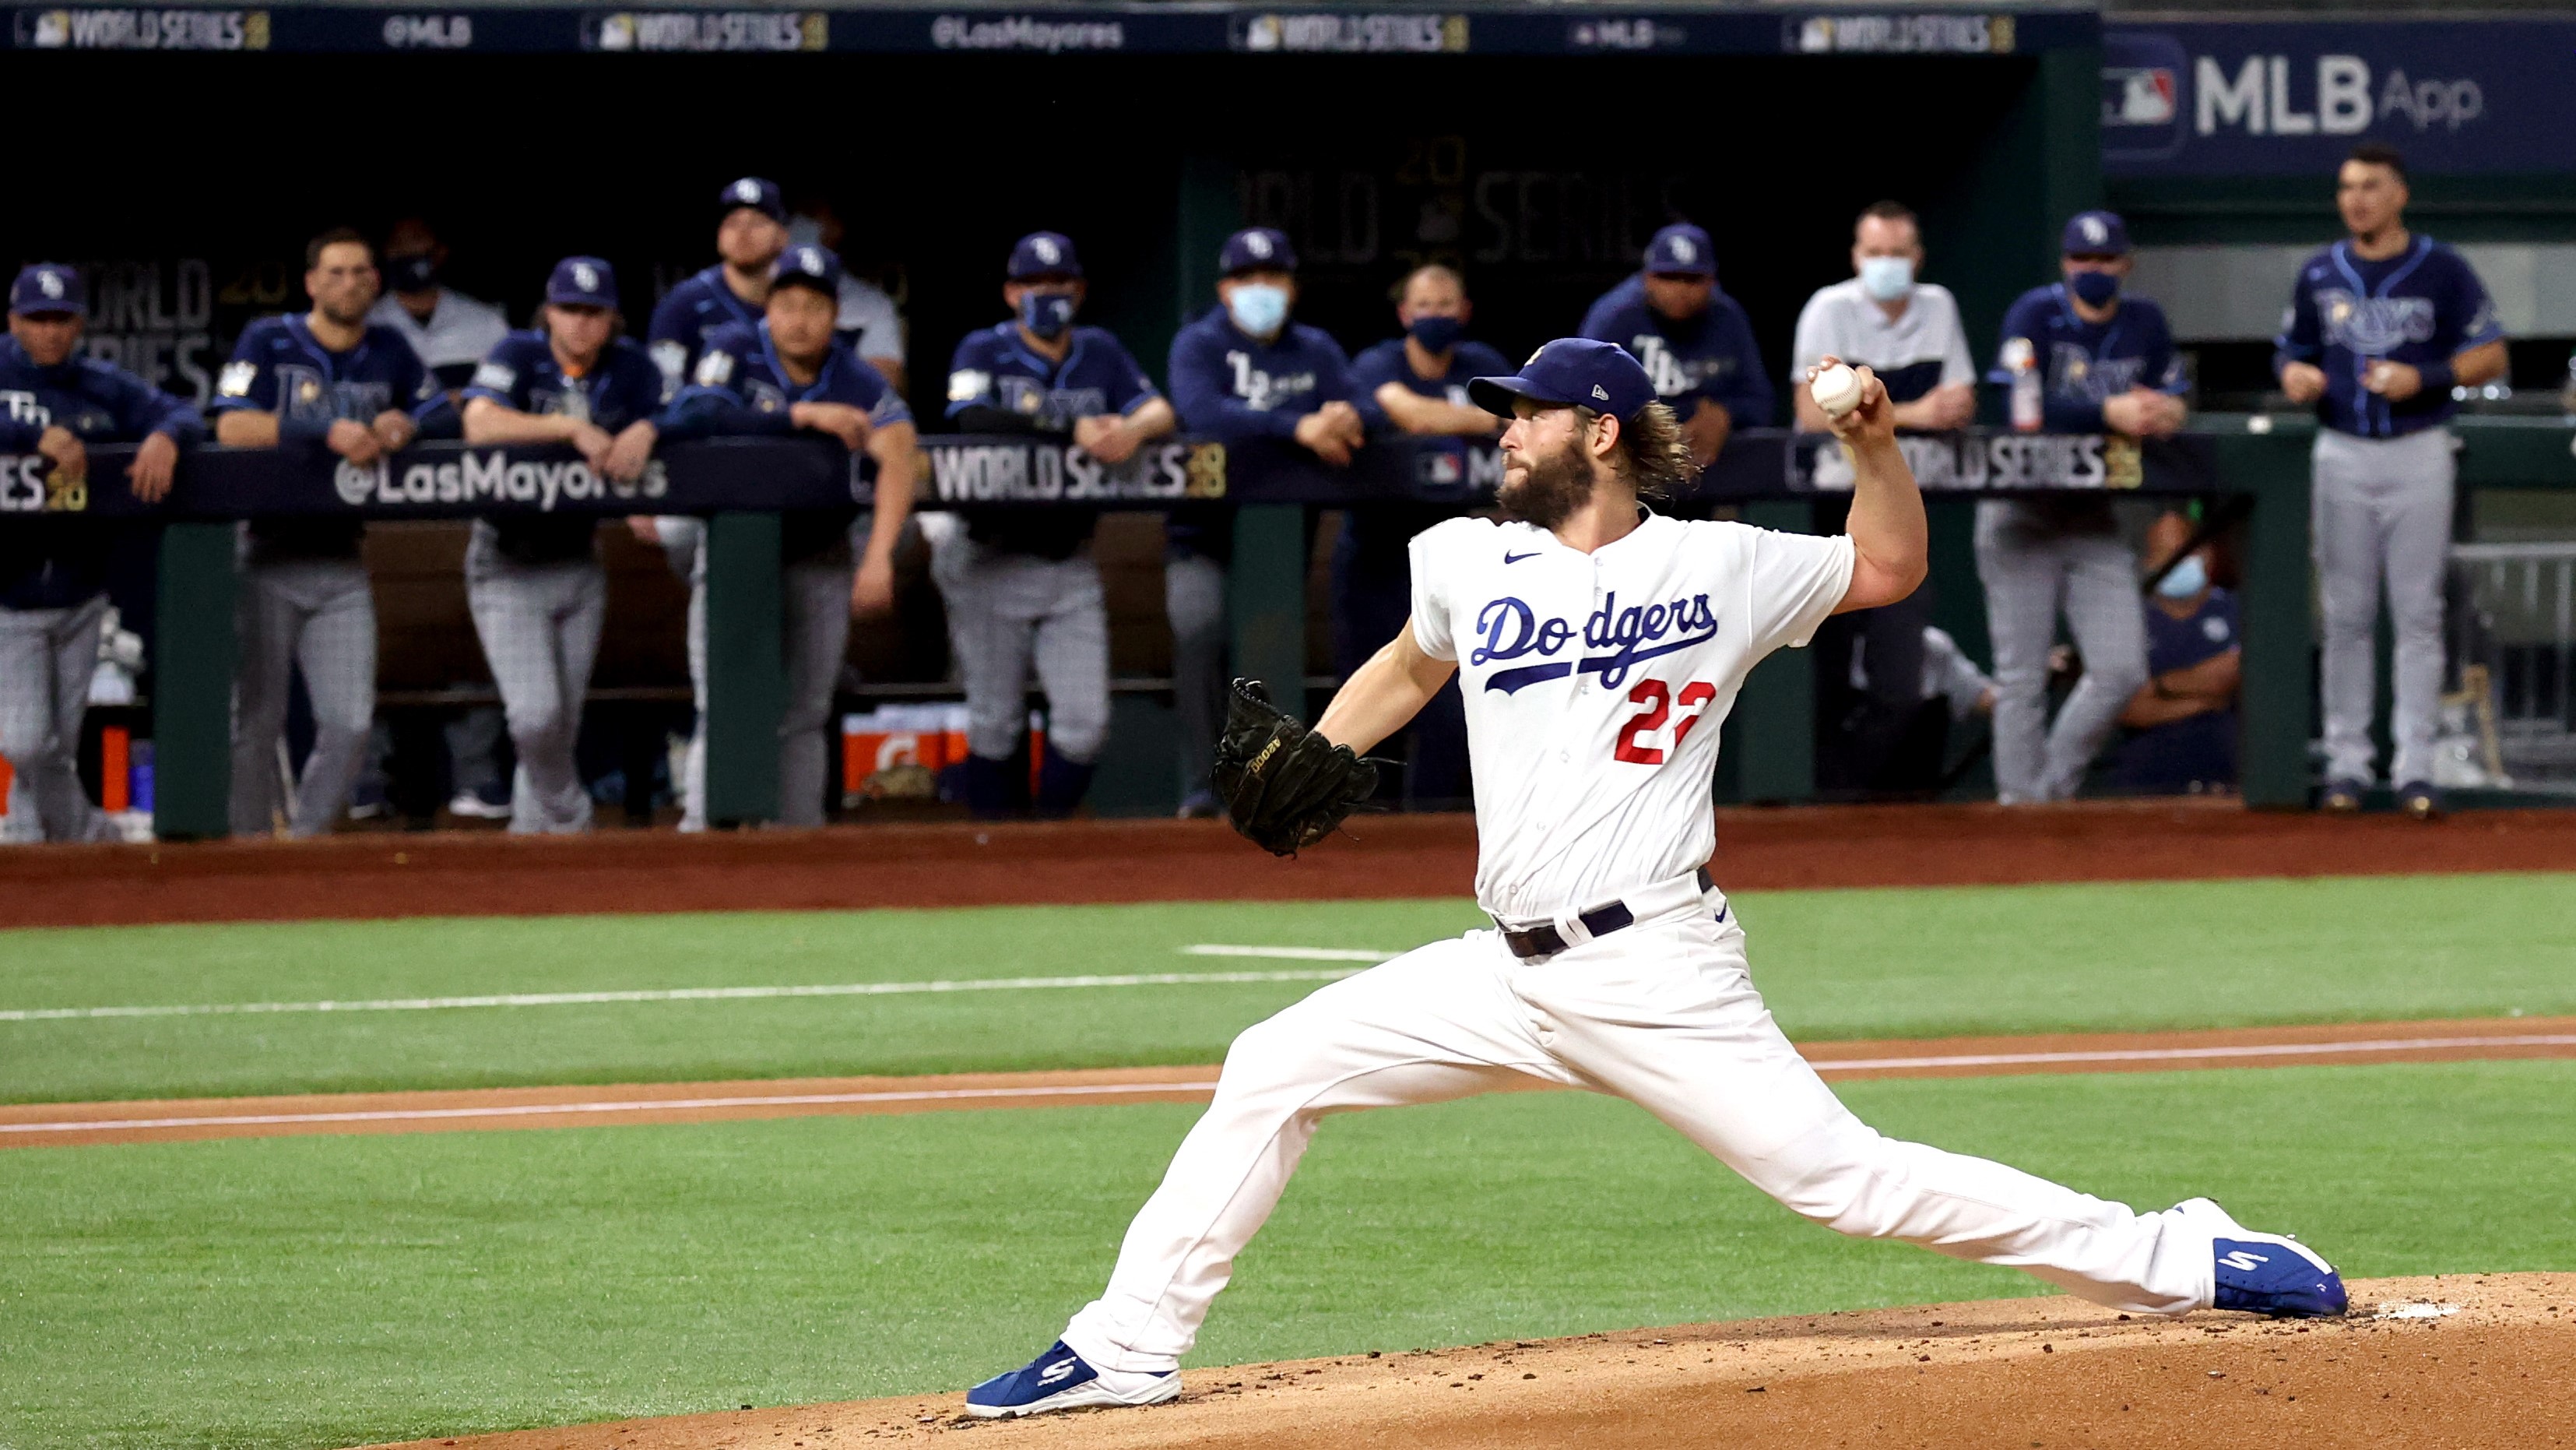 World Series 2020 Game 6: Tampa Bay Rays 1-3 Los Angeles Dodgers